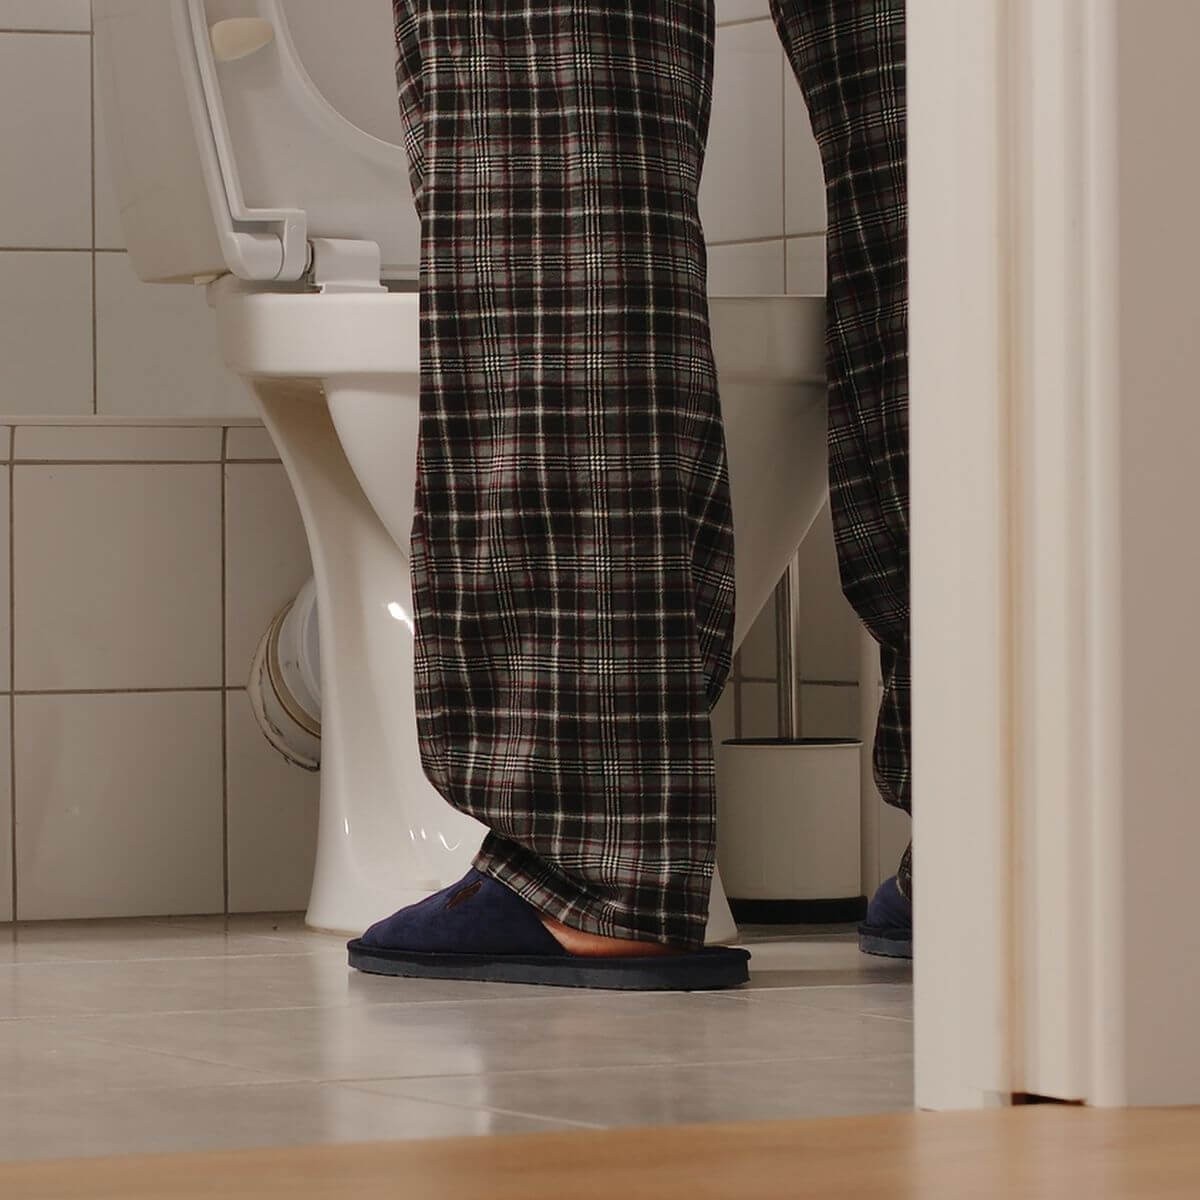 Man wearing slippers and pajamas peeing in a toilet